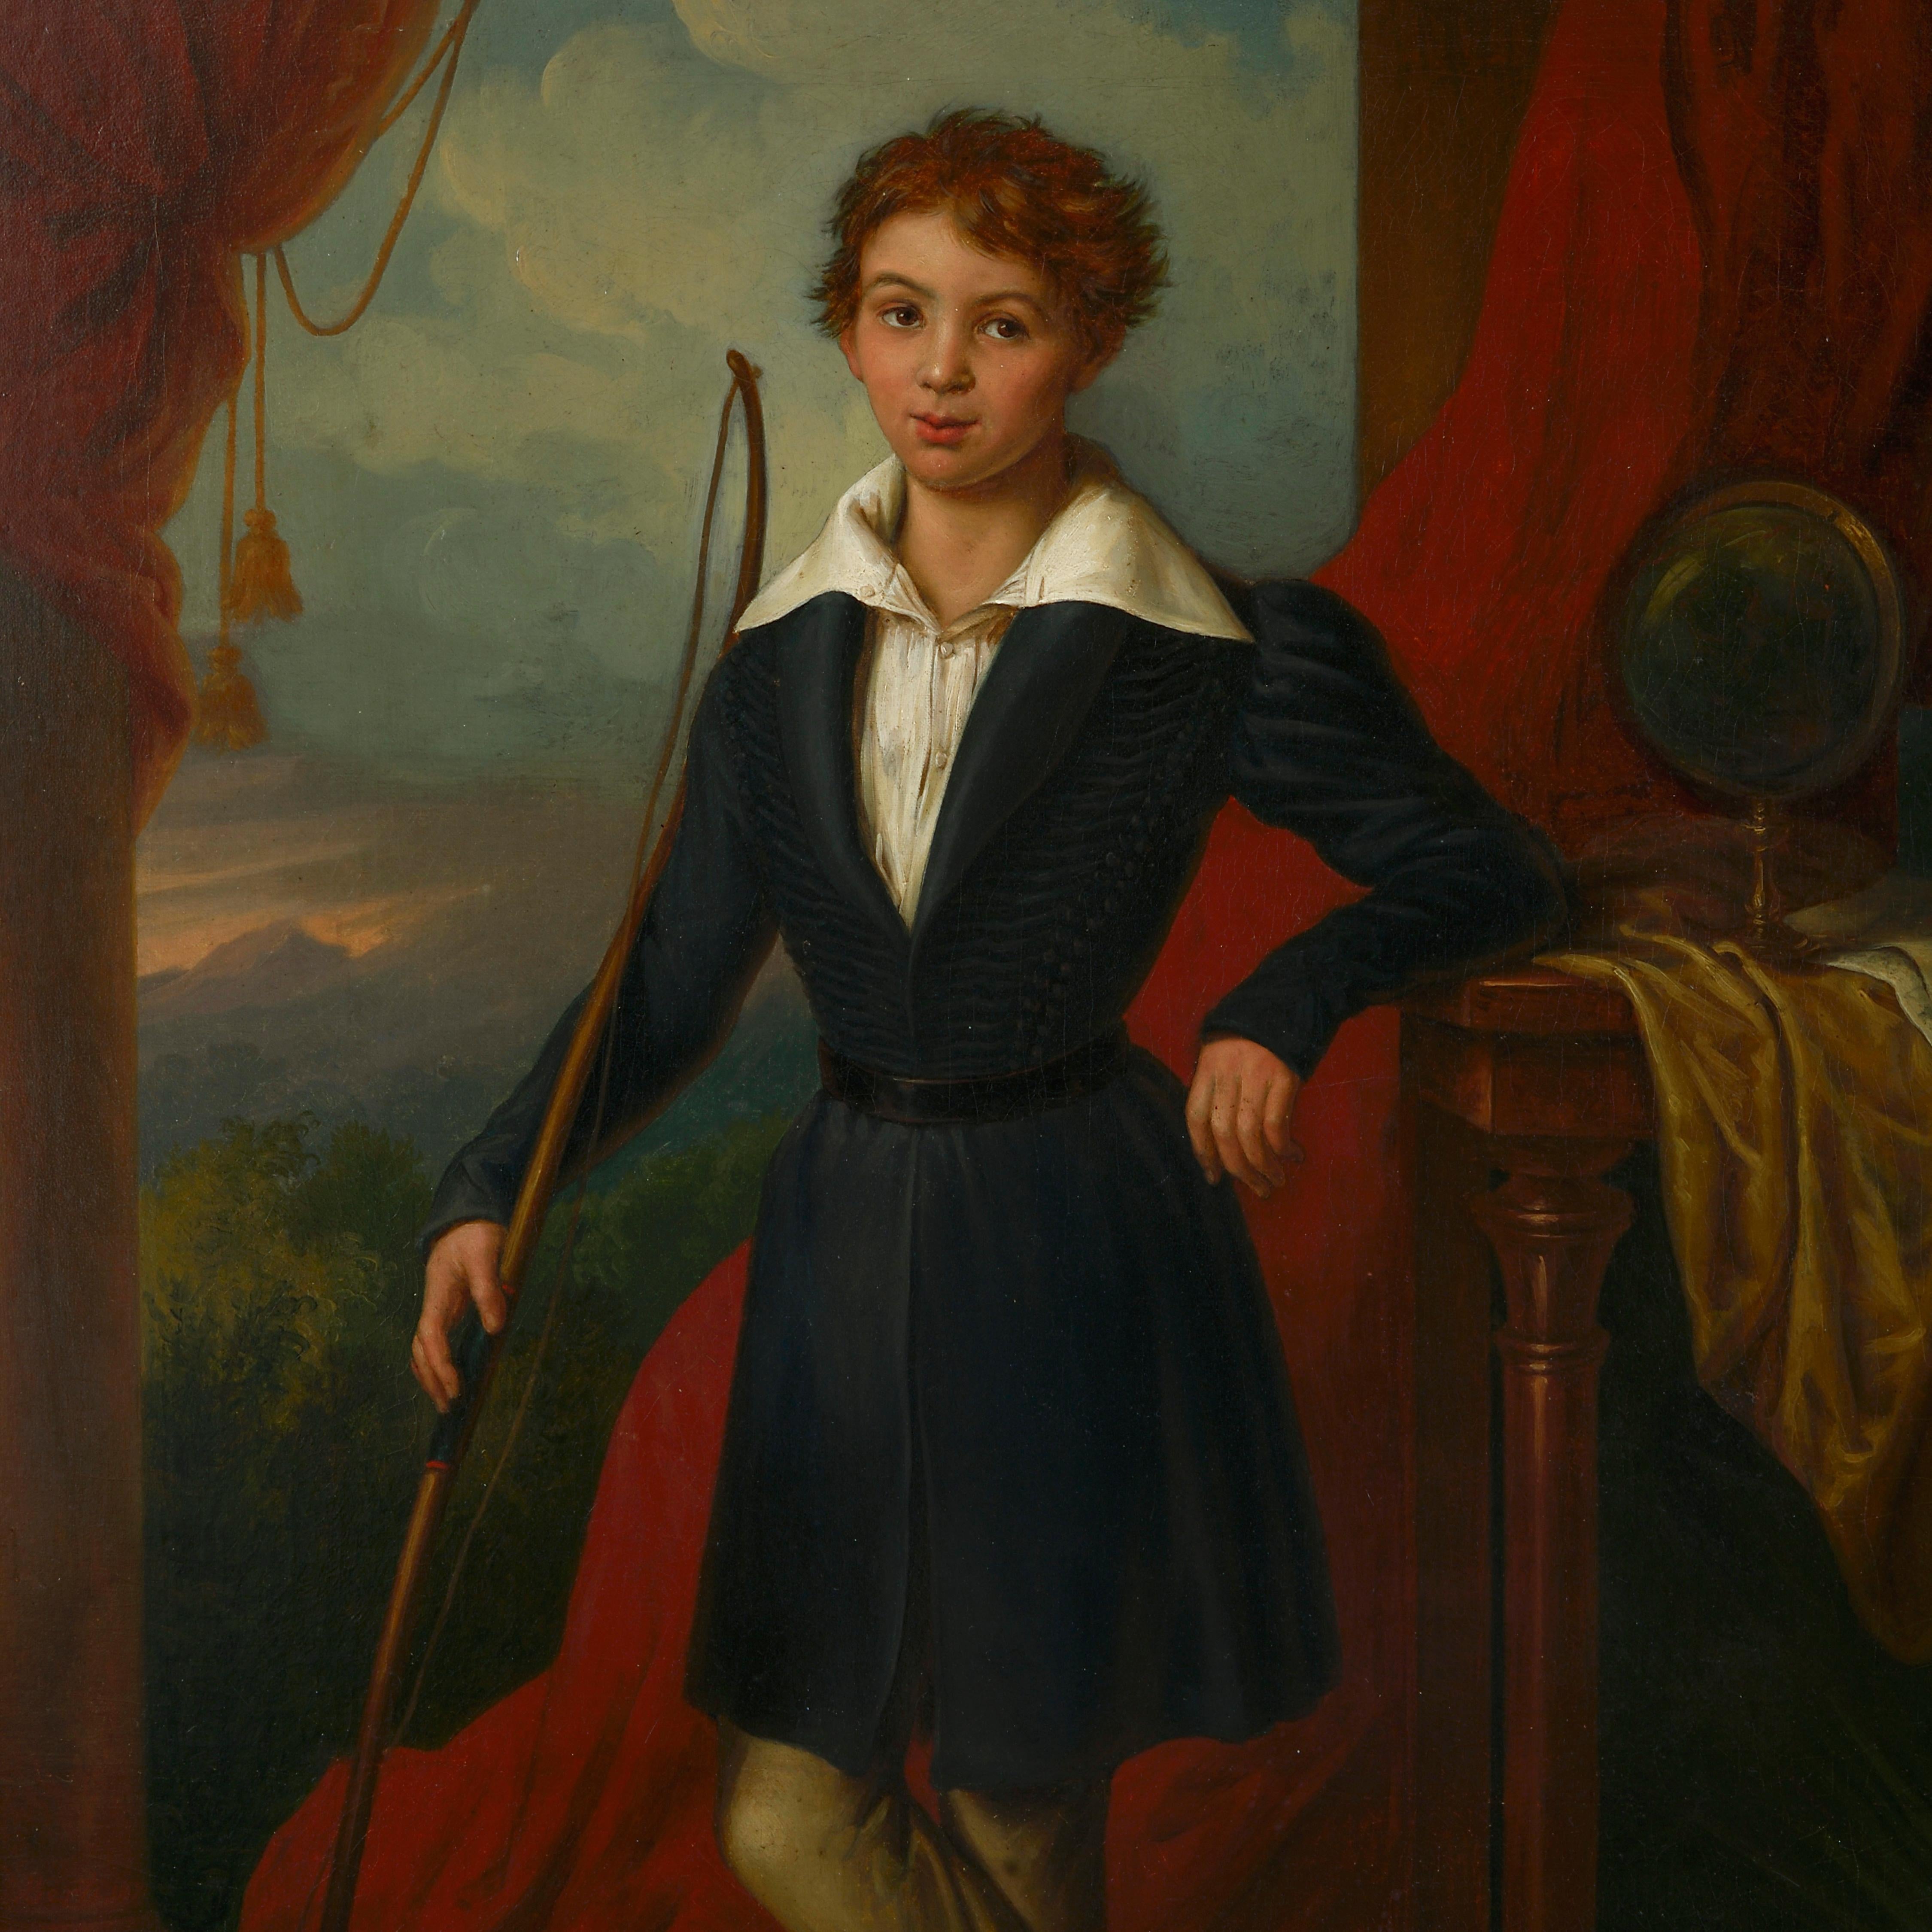 Giorgio Berti (1794-1863)

Portrait of a Boy with a Long Bow

Oil on canvas; signed and dated 1834; held in a gilded frame

Giorgio Berti is a relatively obscure painter who is recorded as exhibiting figurative works in Britain during the 1830s,